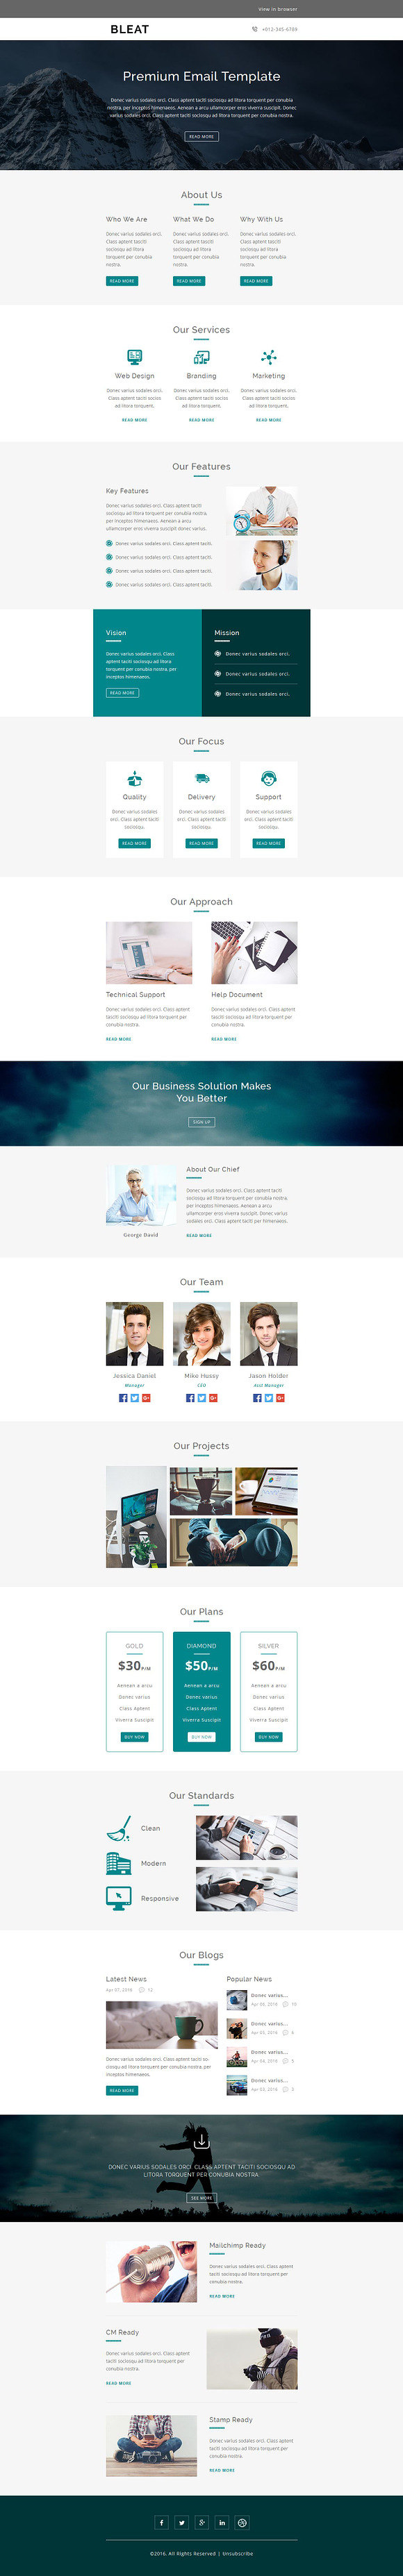 BLEAT - Responsive Email Template in Mailchimp Templates - product preview 1